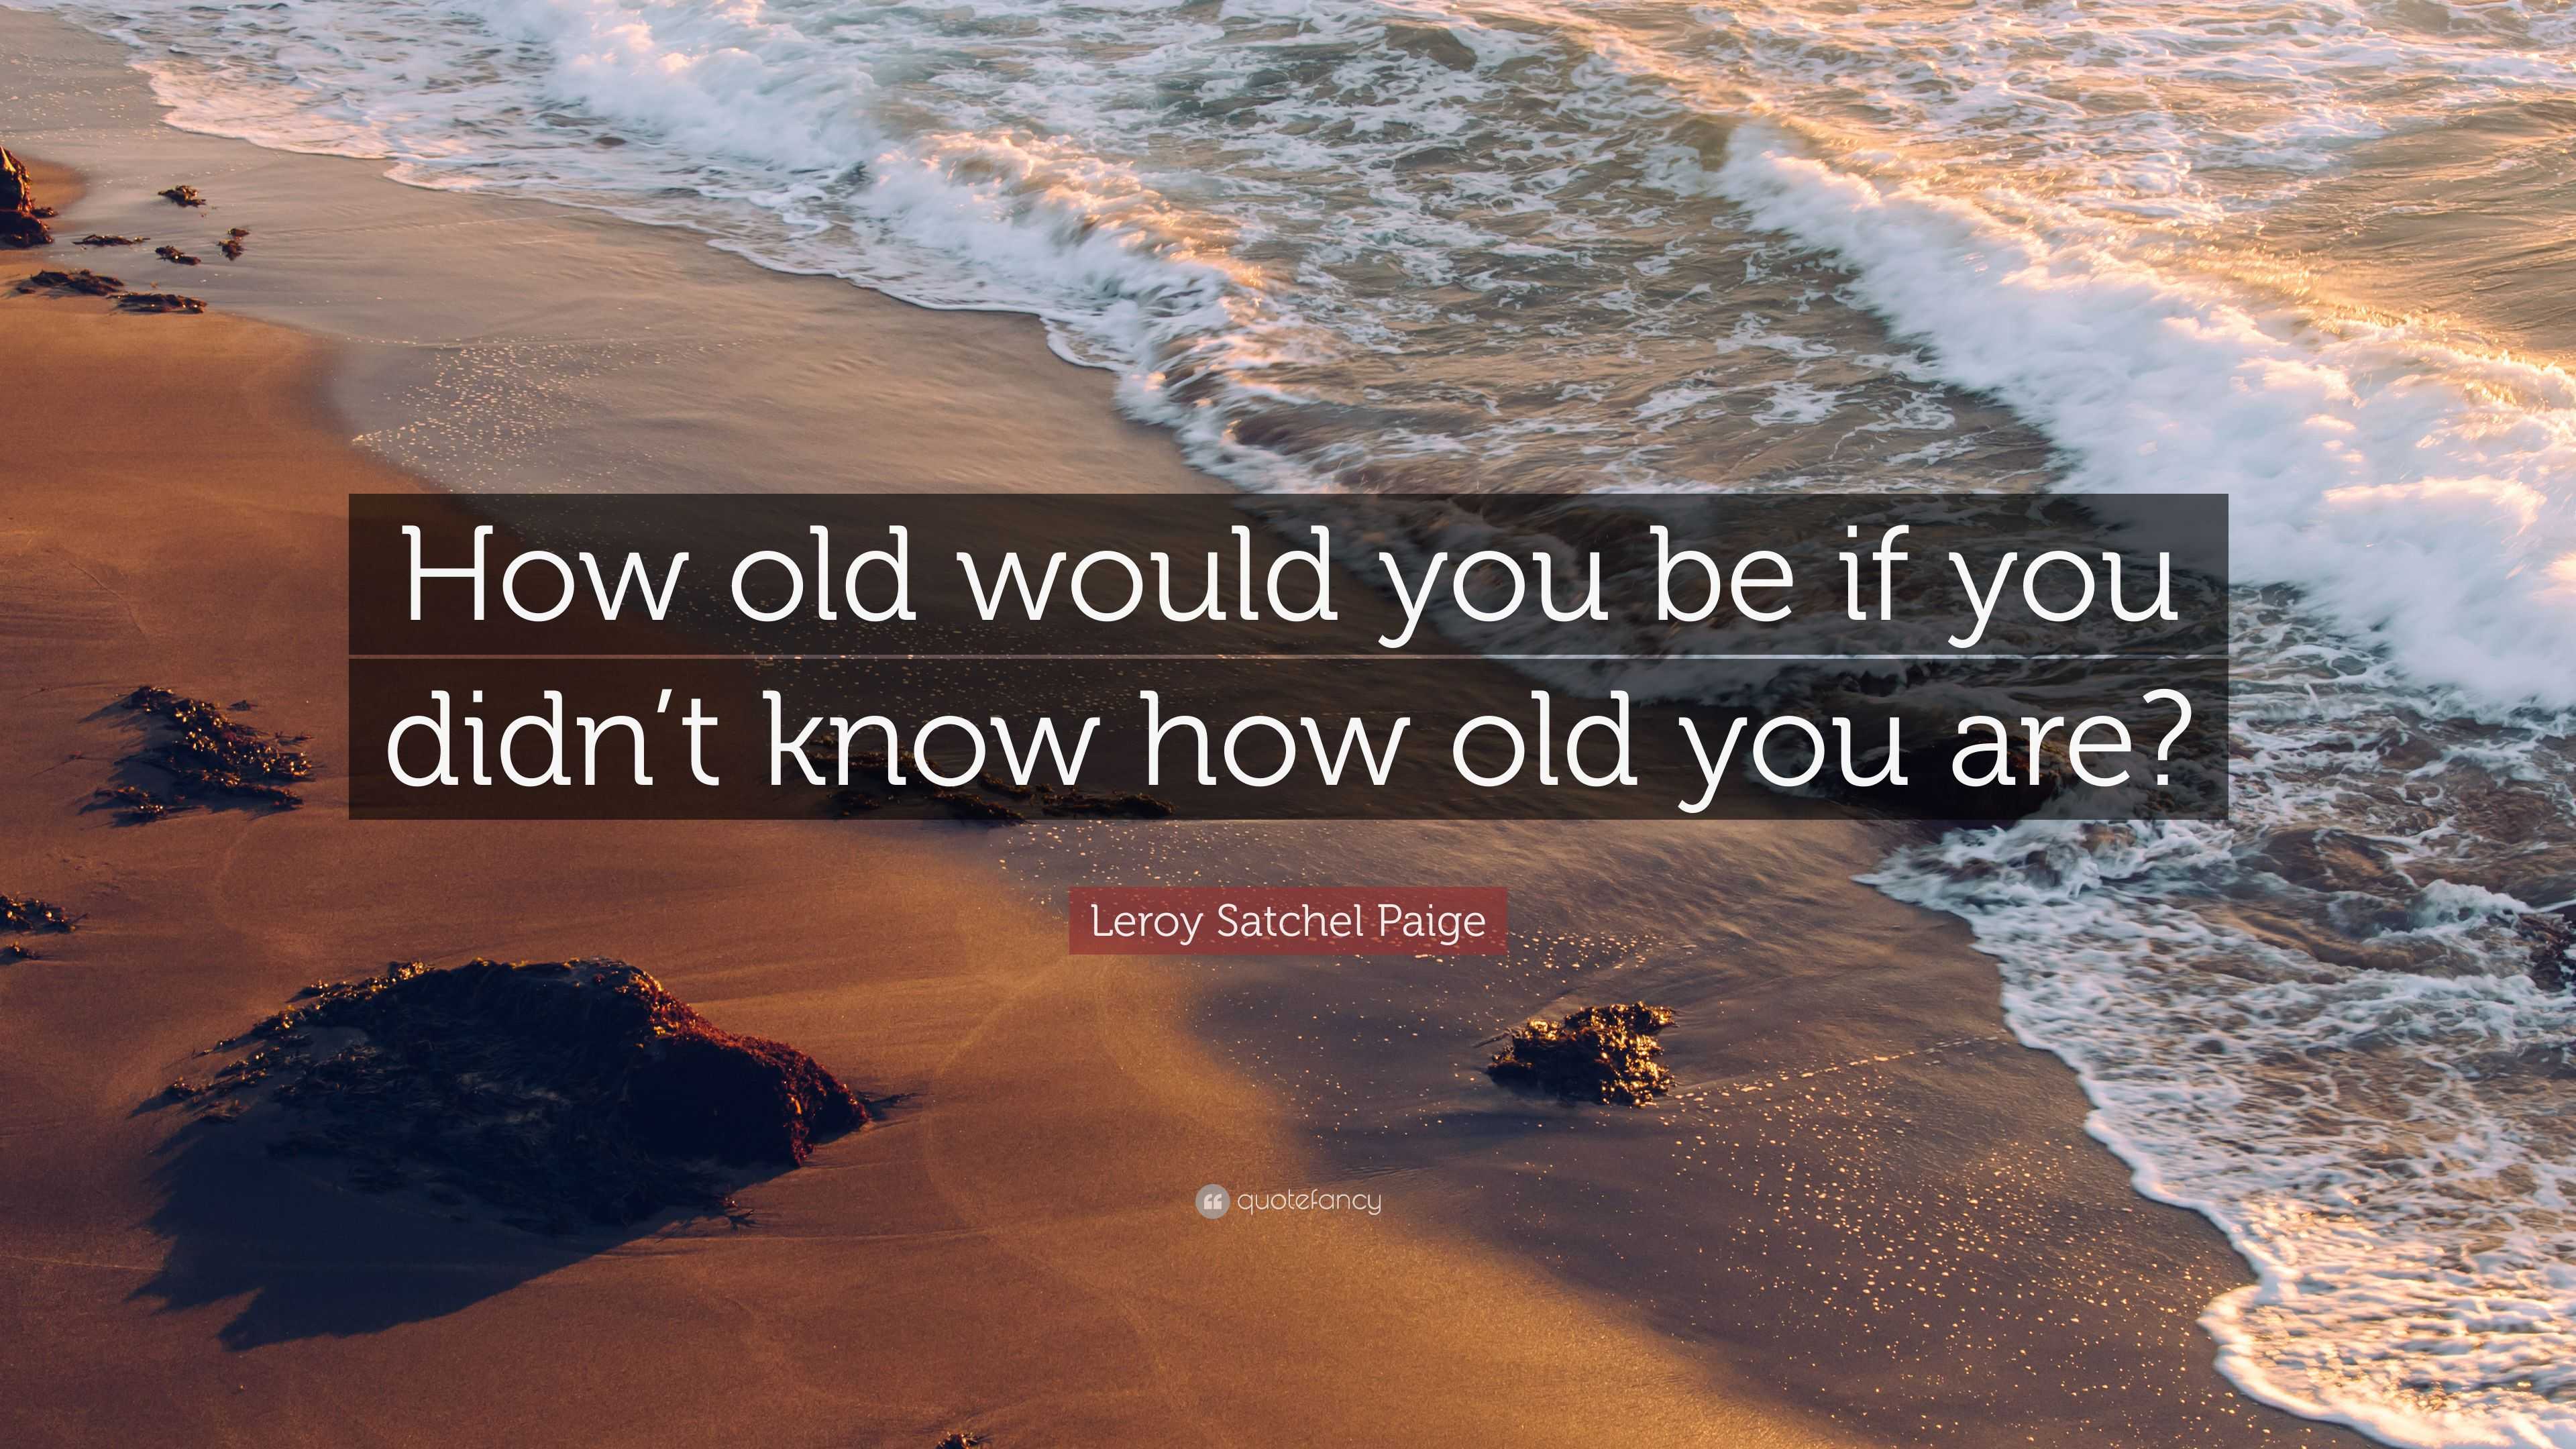 Satchel Paige 's quote about age. How old would you be…